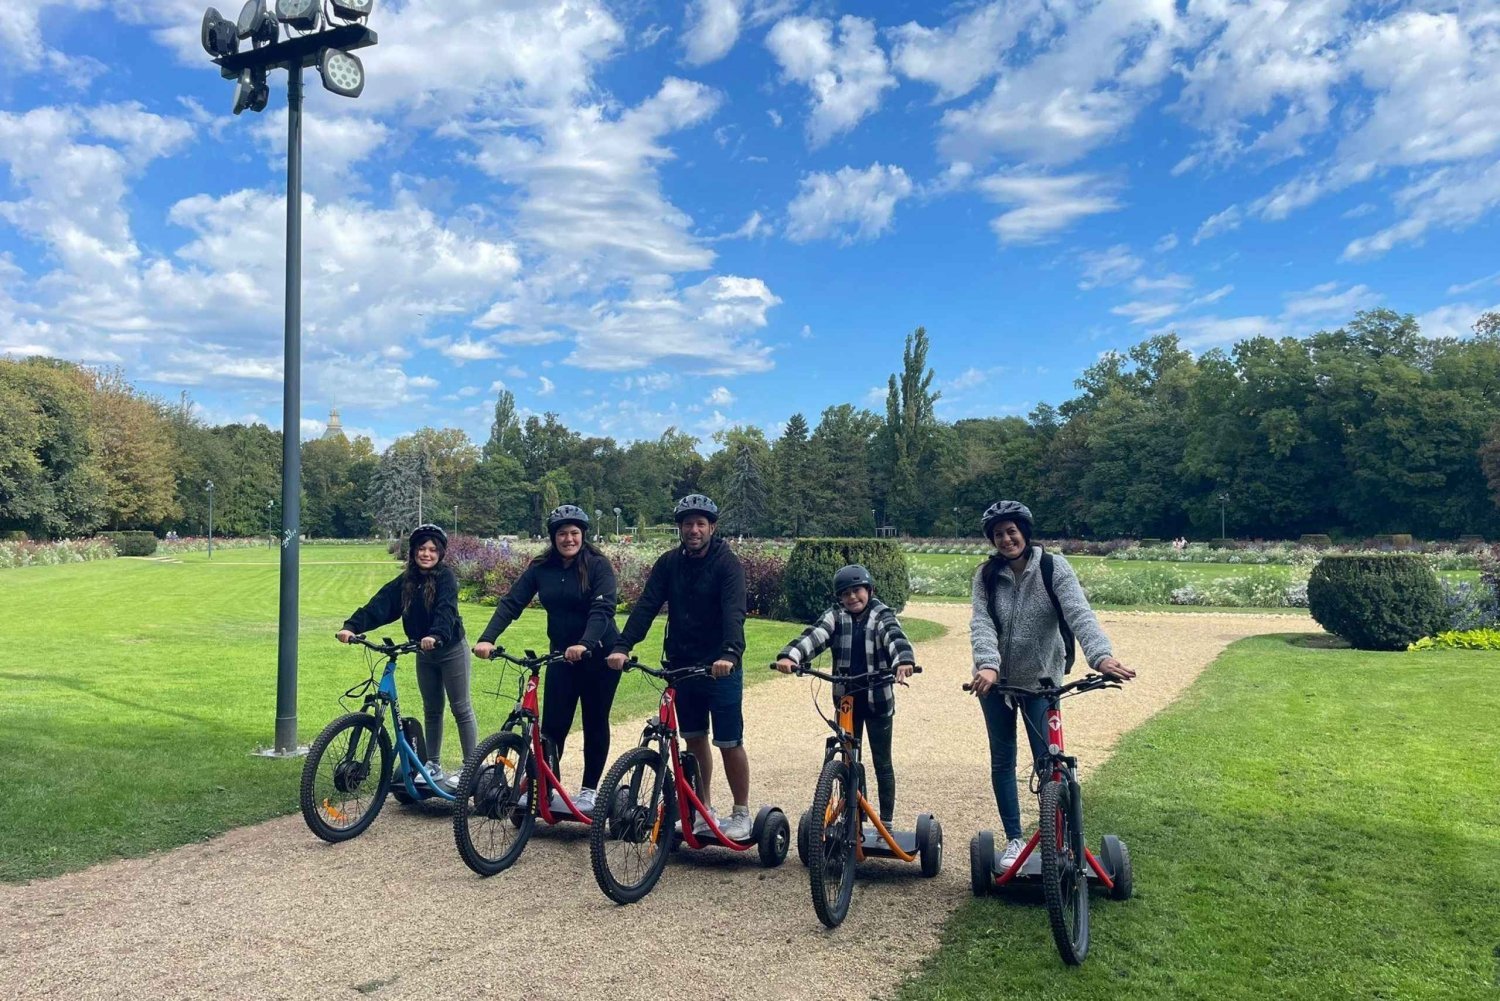 Guided tour to Margaret Island with E-Trikes